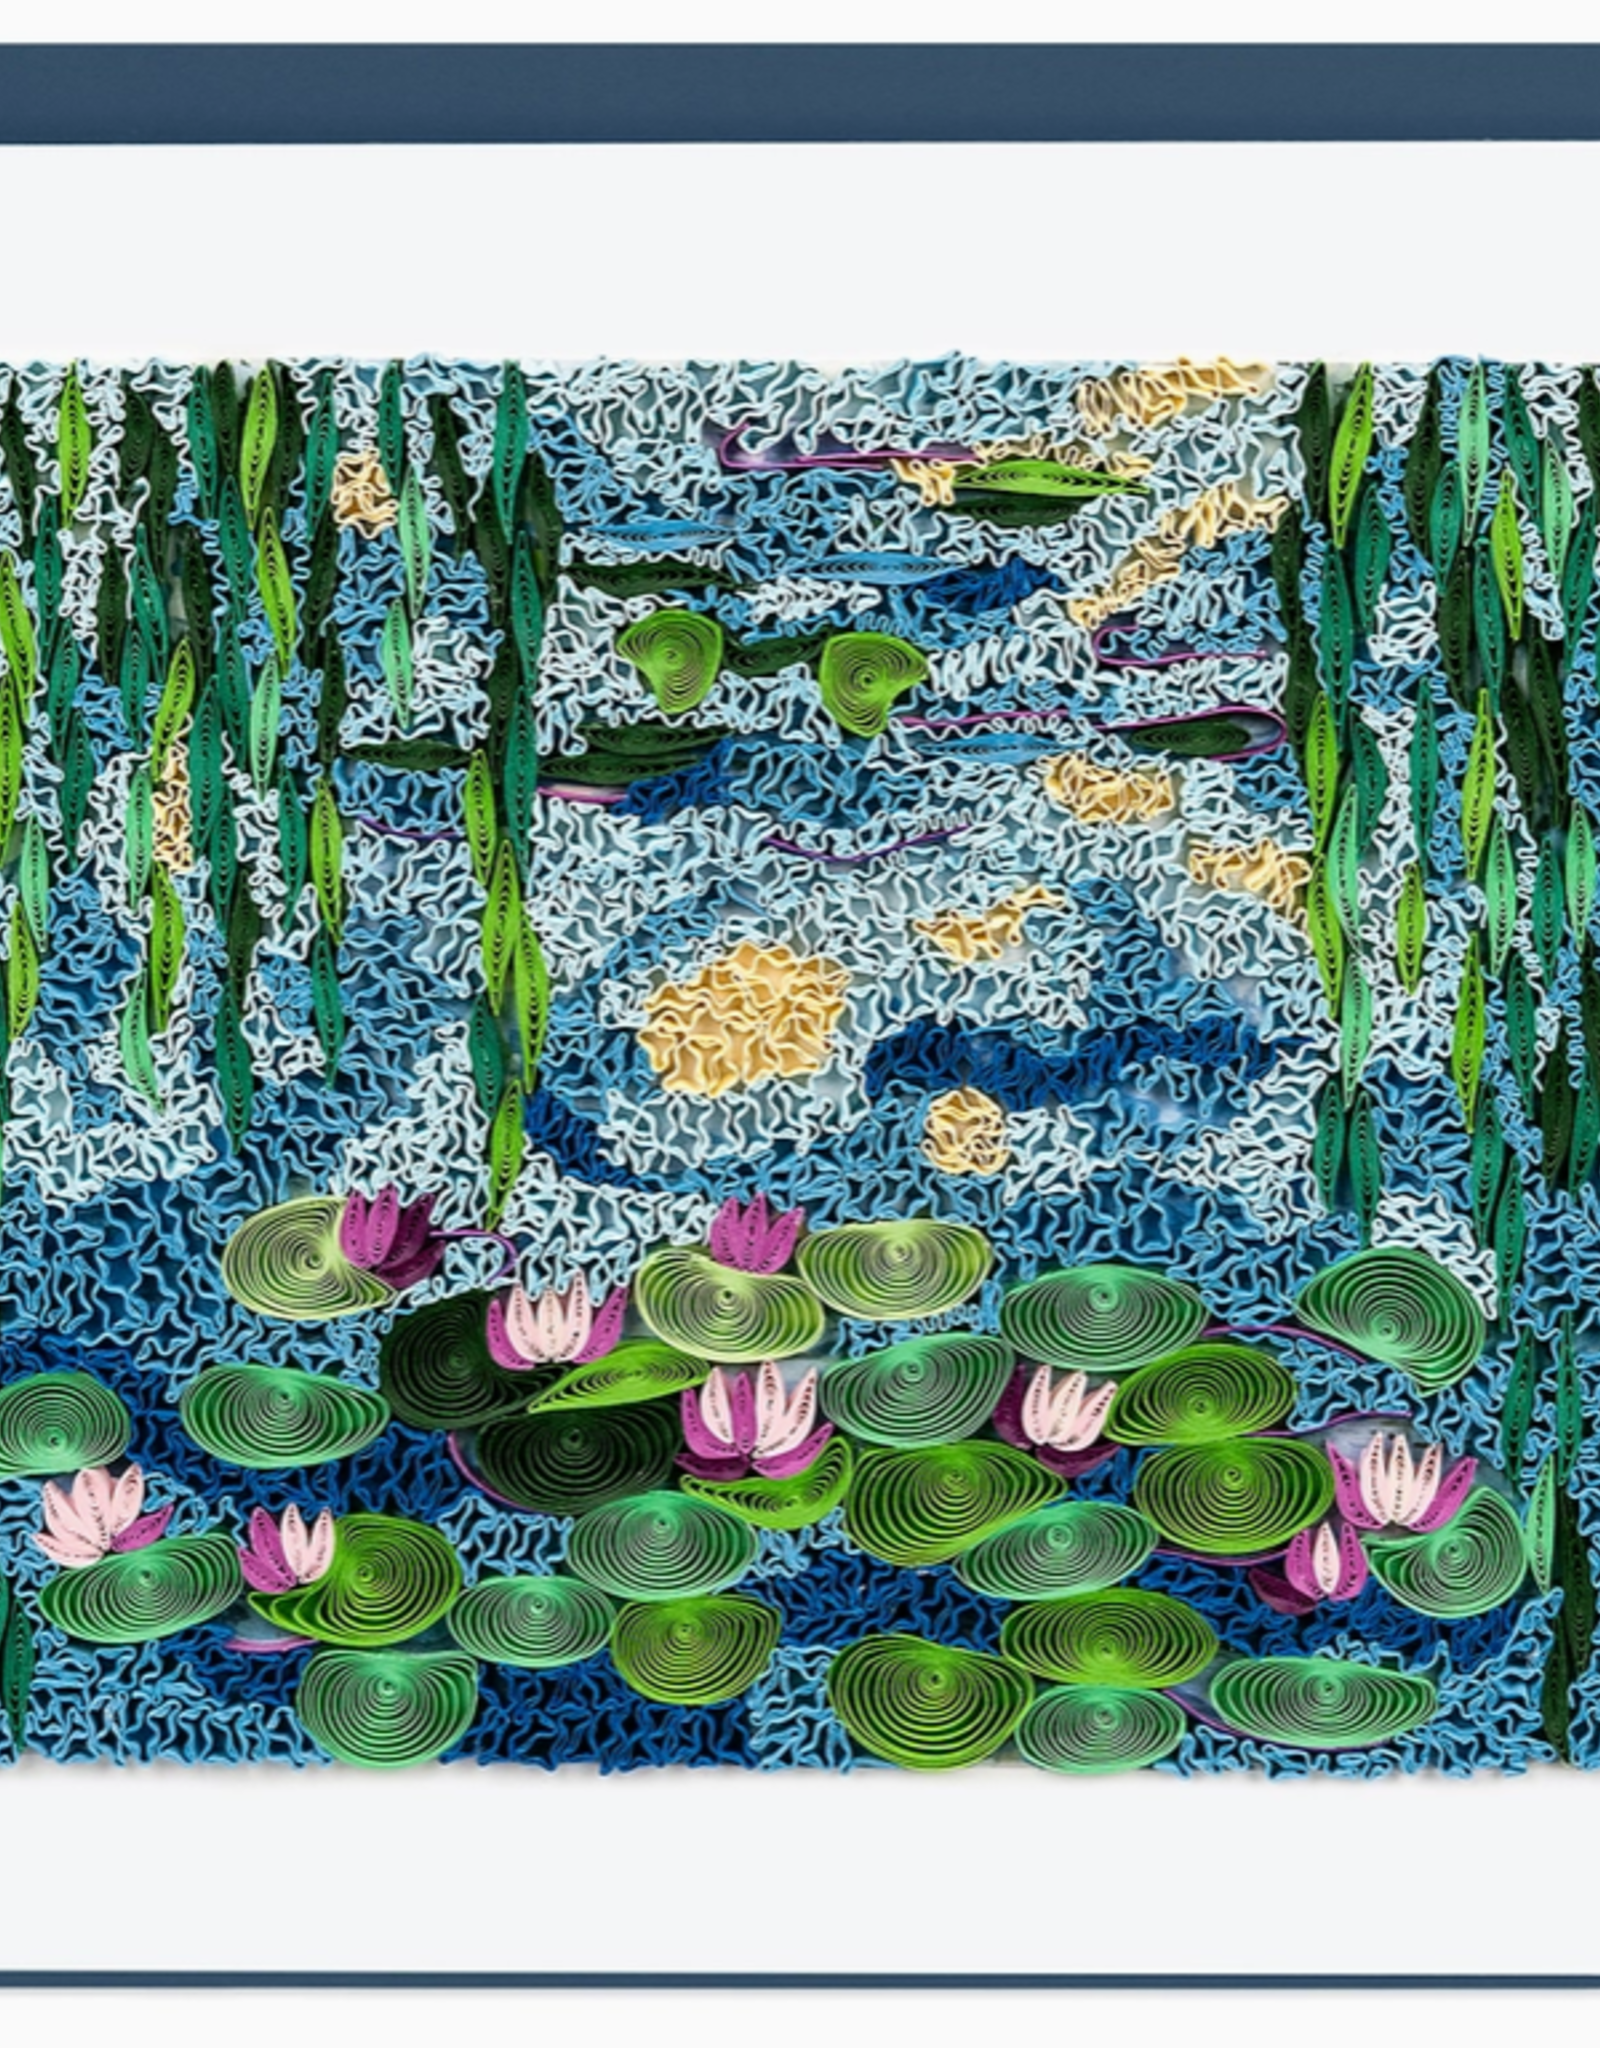 Quilling Card Quilled Water Lilies 1916-19, Monet - Artist Series